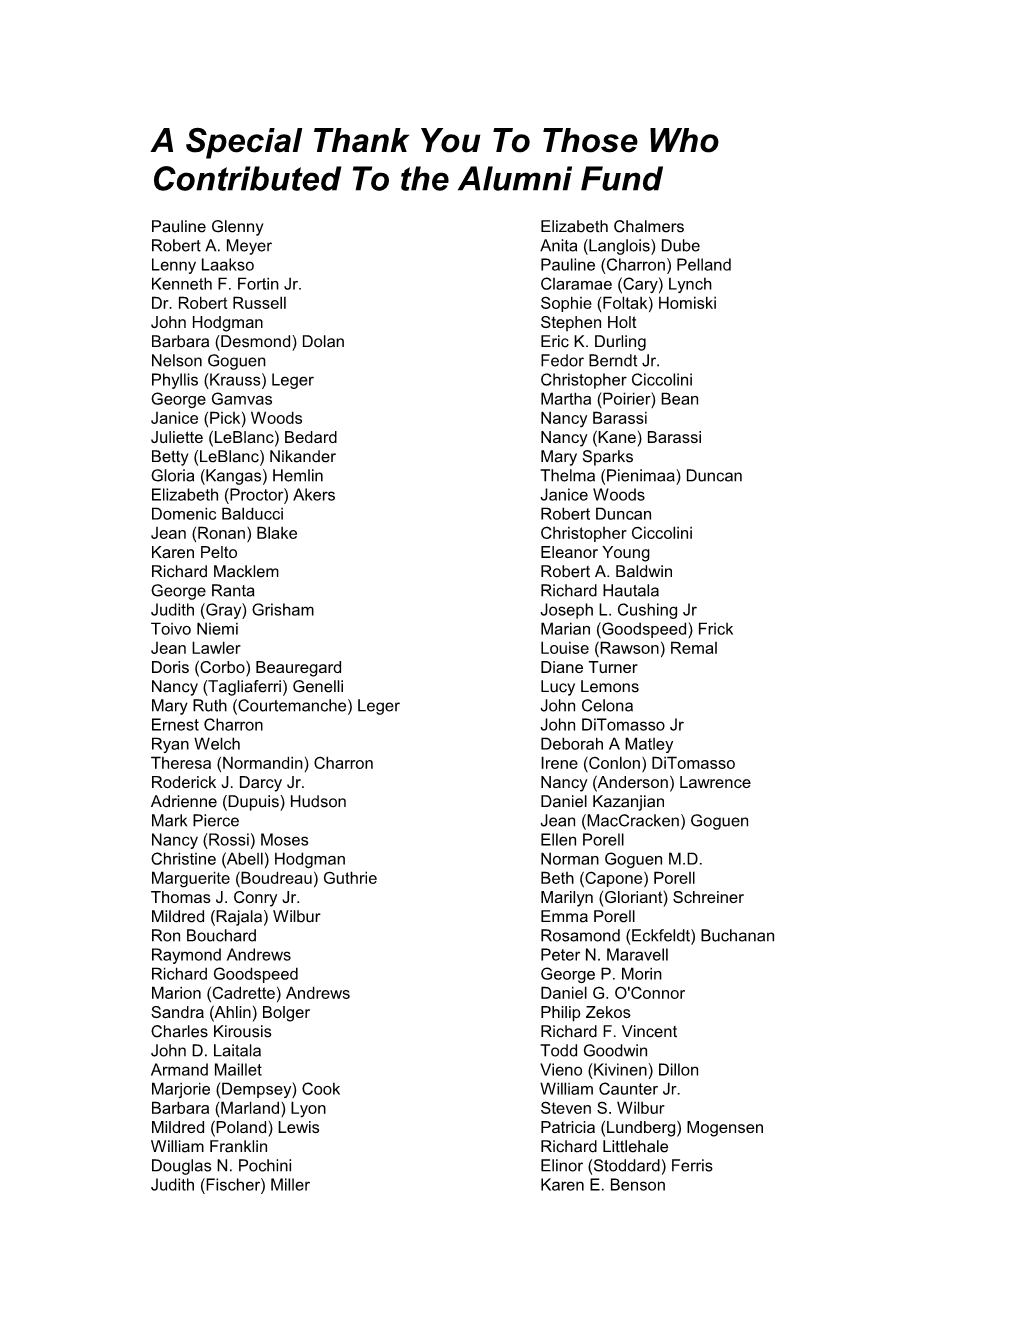 A Special Thank You to Those Who Contributed to the Alumni Fund